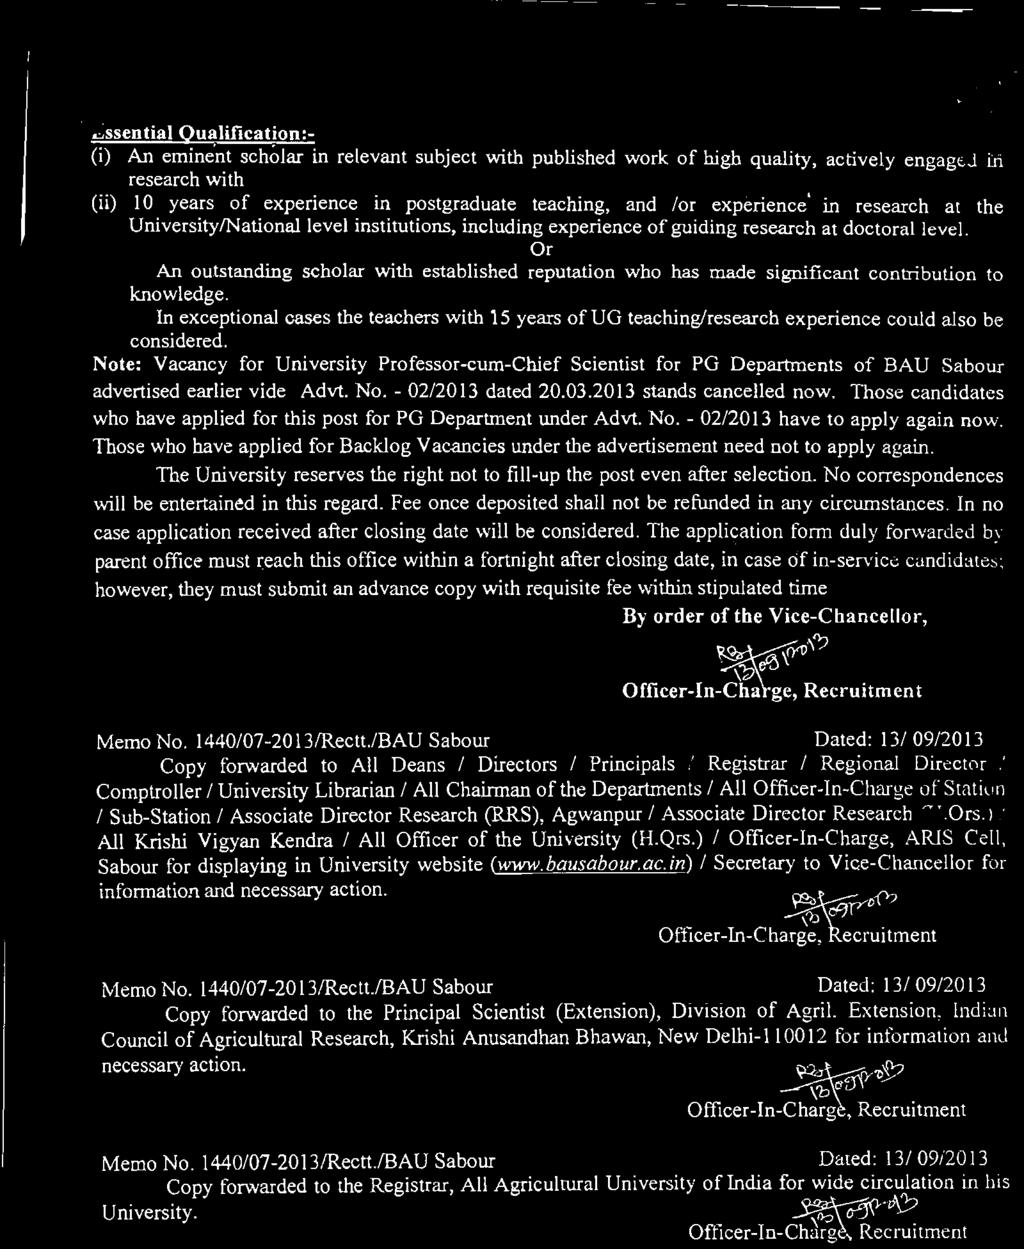 Departments 1 All OfficerInCharge of Station 1 SubStation 1 Associate DirectOf Research (RRS) Agwanpur 1 Aj;sociate Director Research (H.Ors.